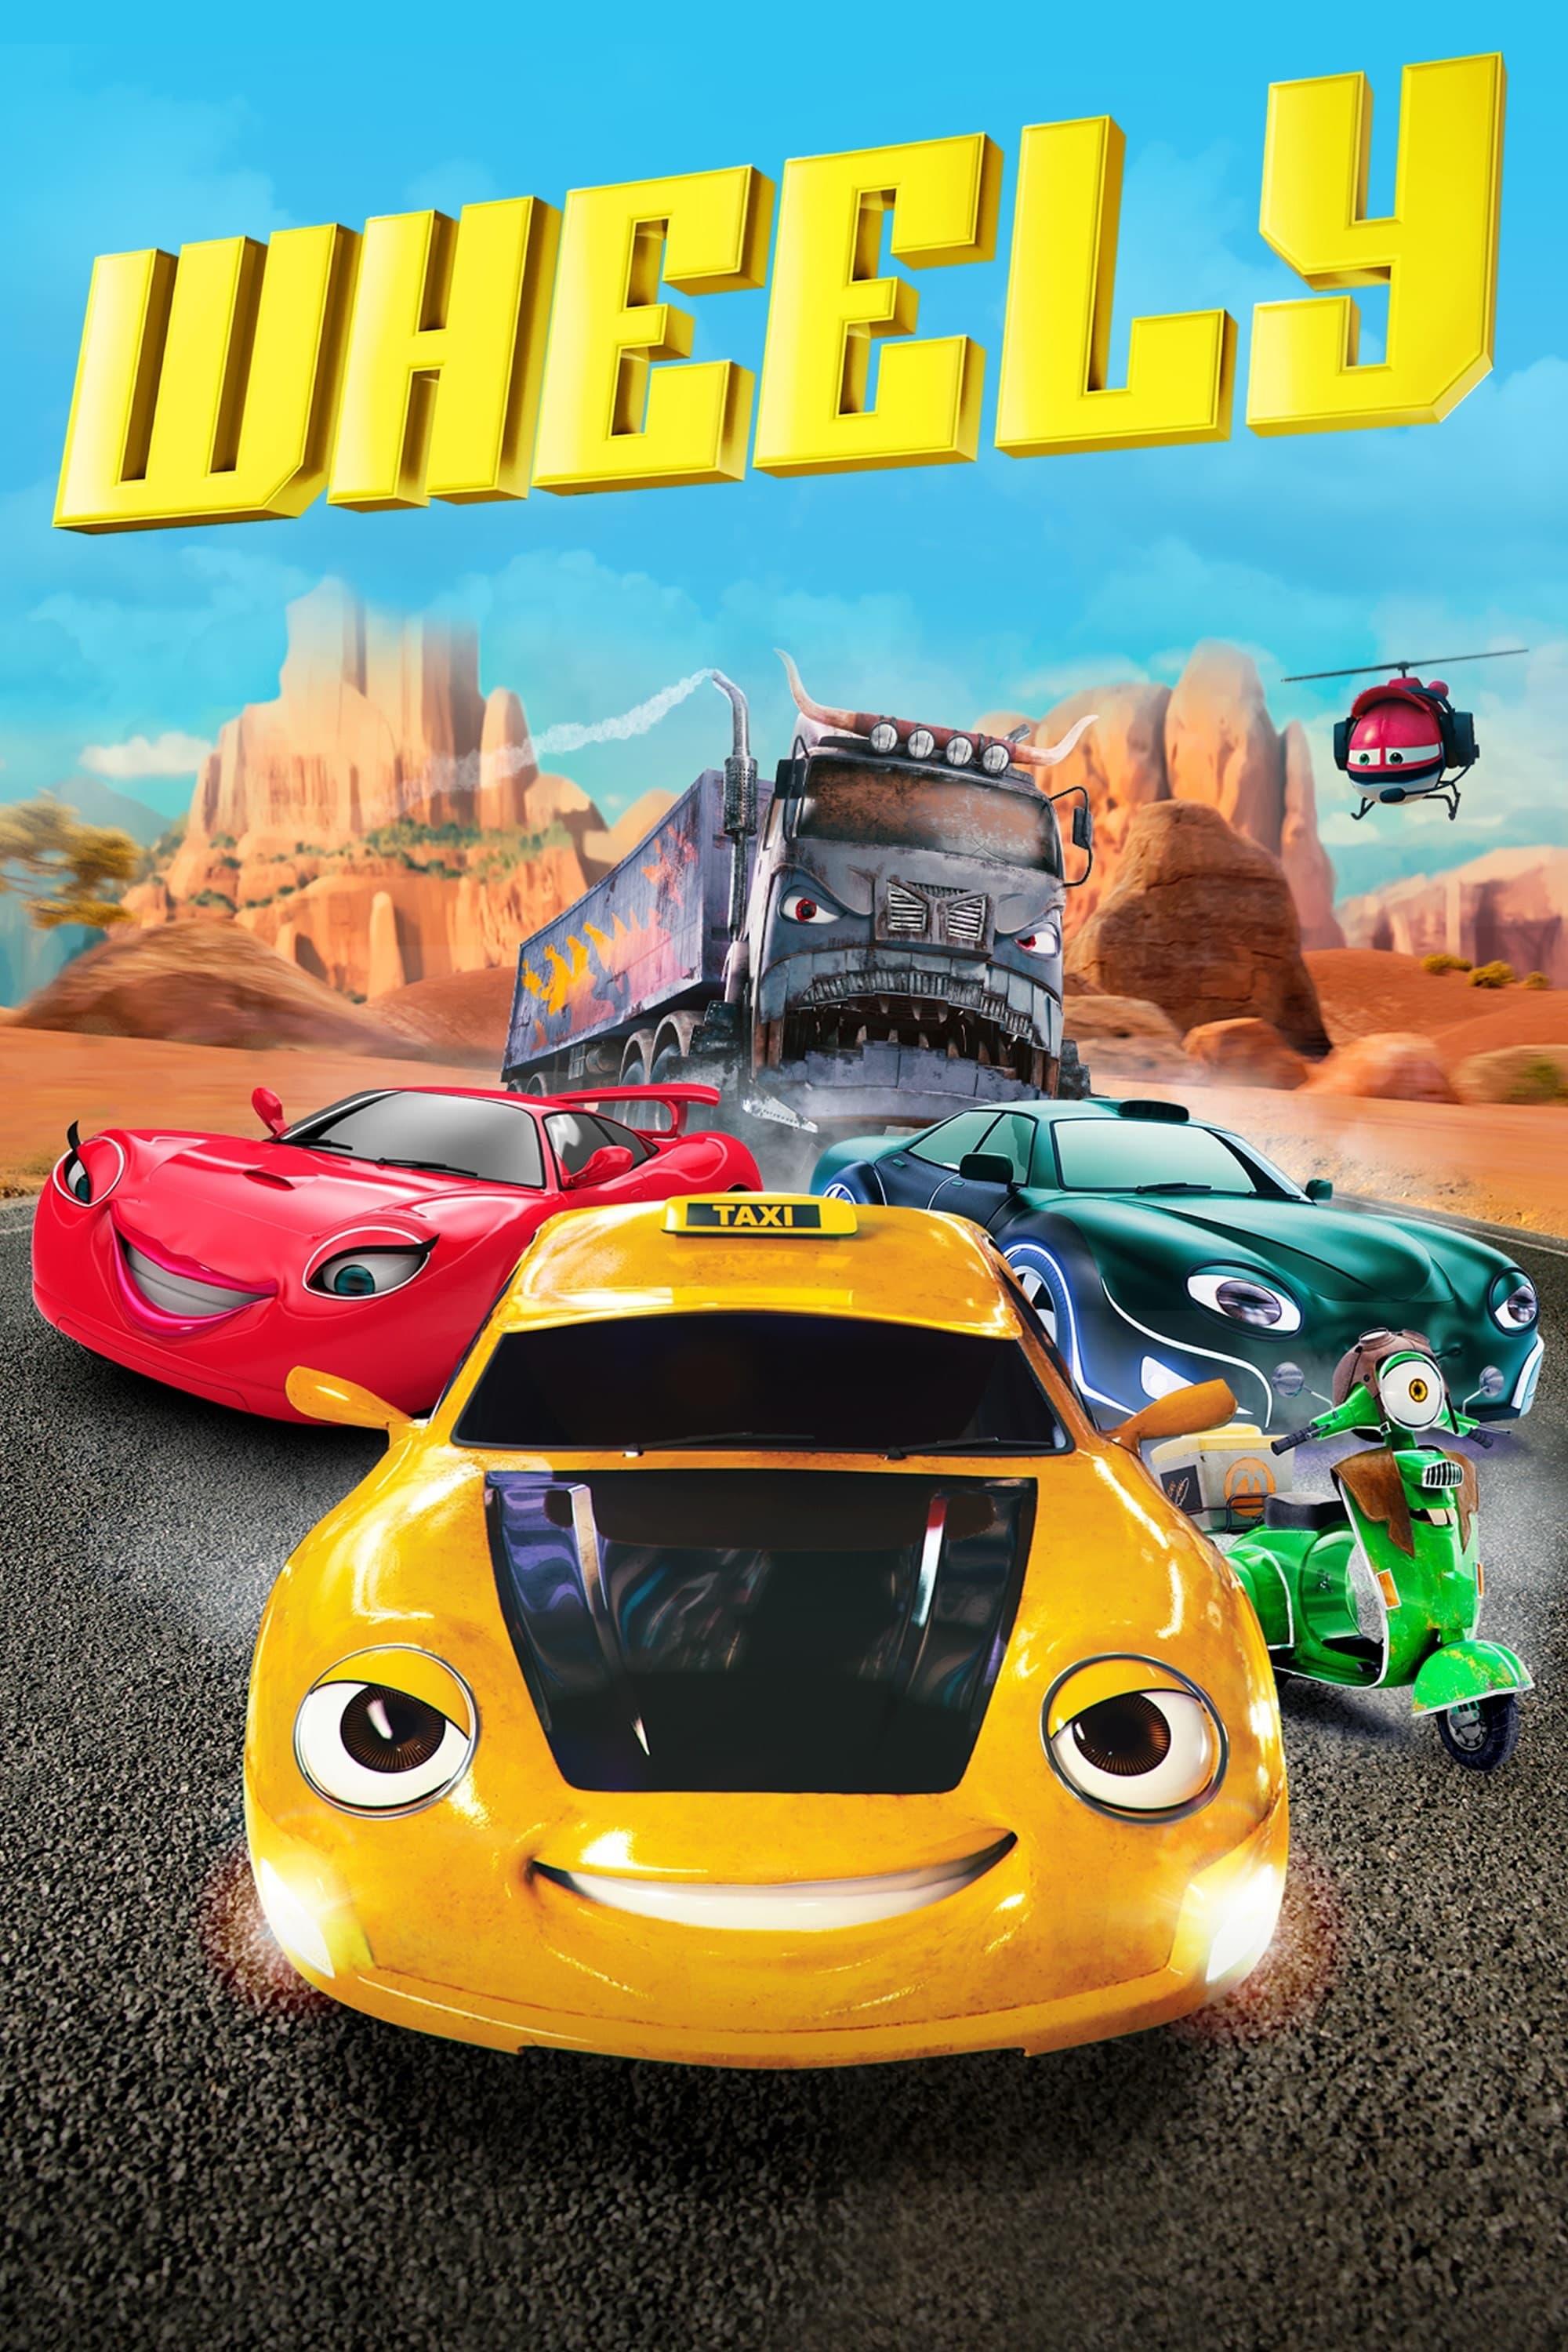 Wheely poster